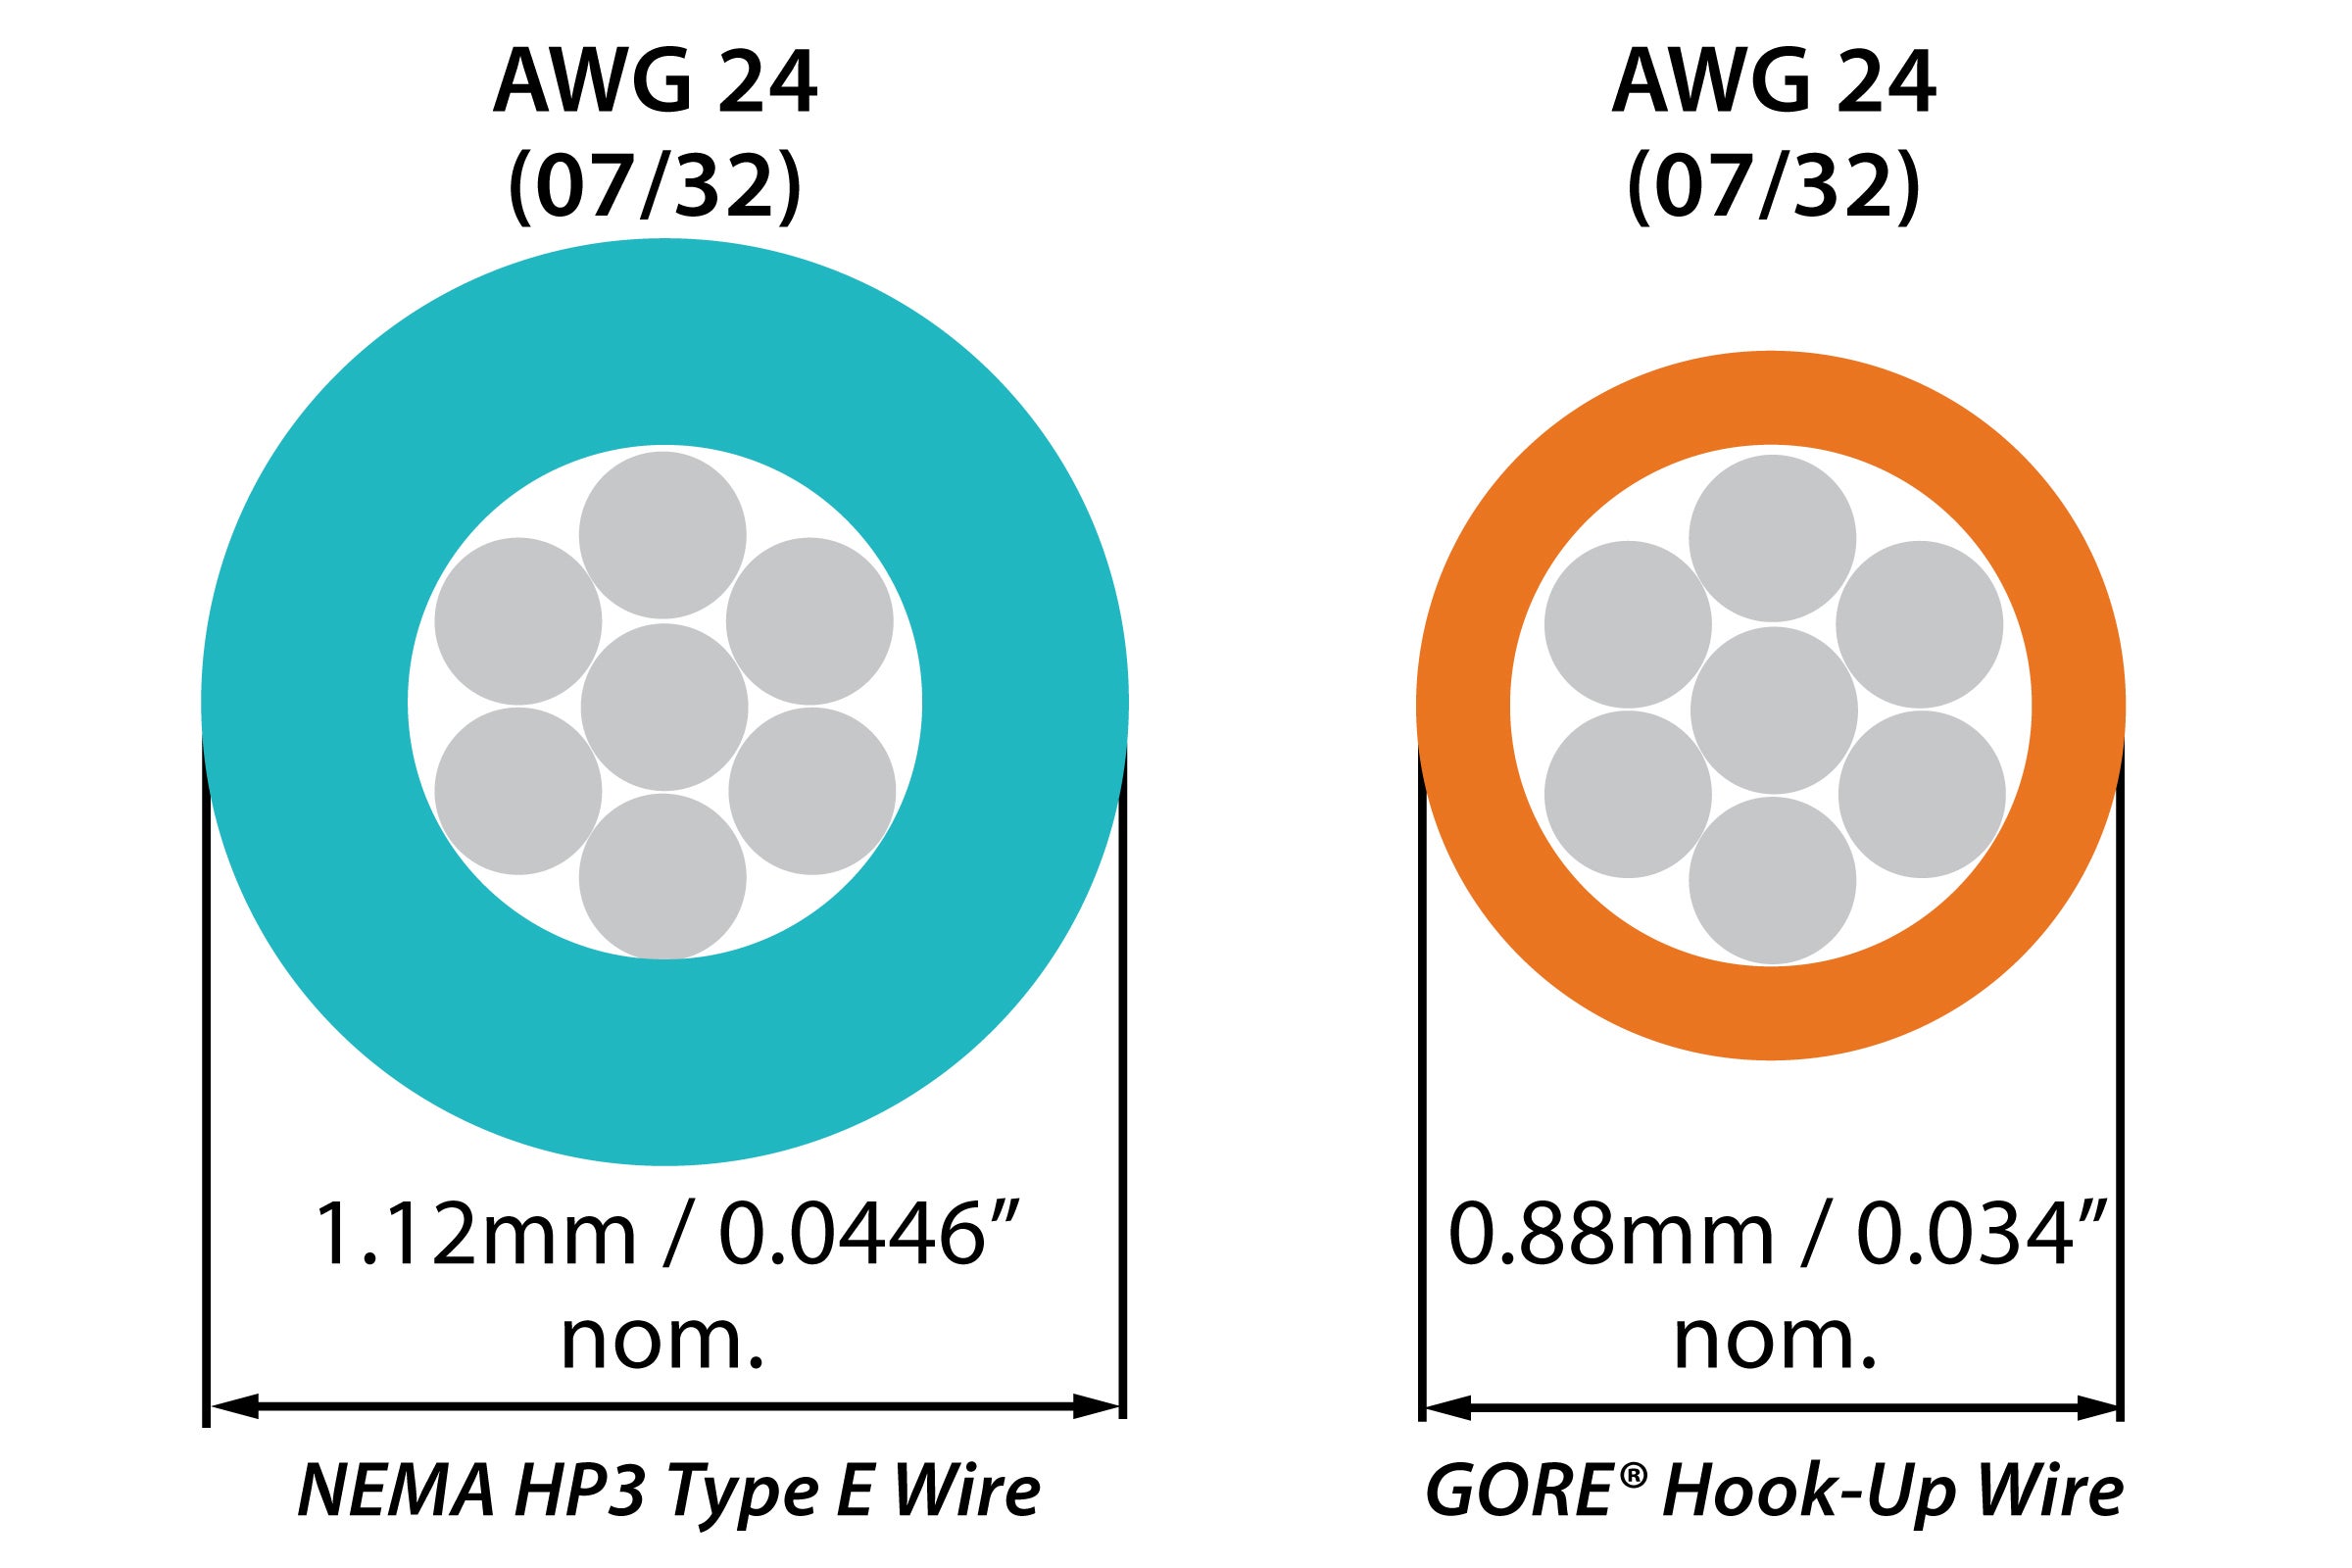 Size comparison of NEMA HP3 Type E Wires and GORE Hook-Up Wires.